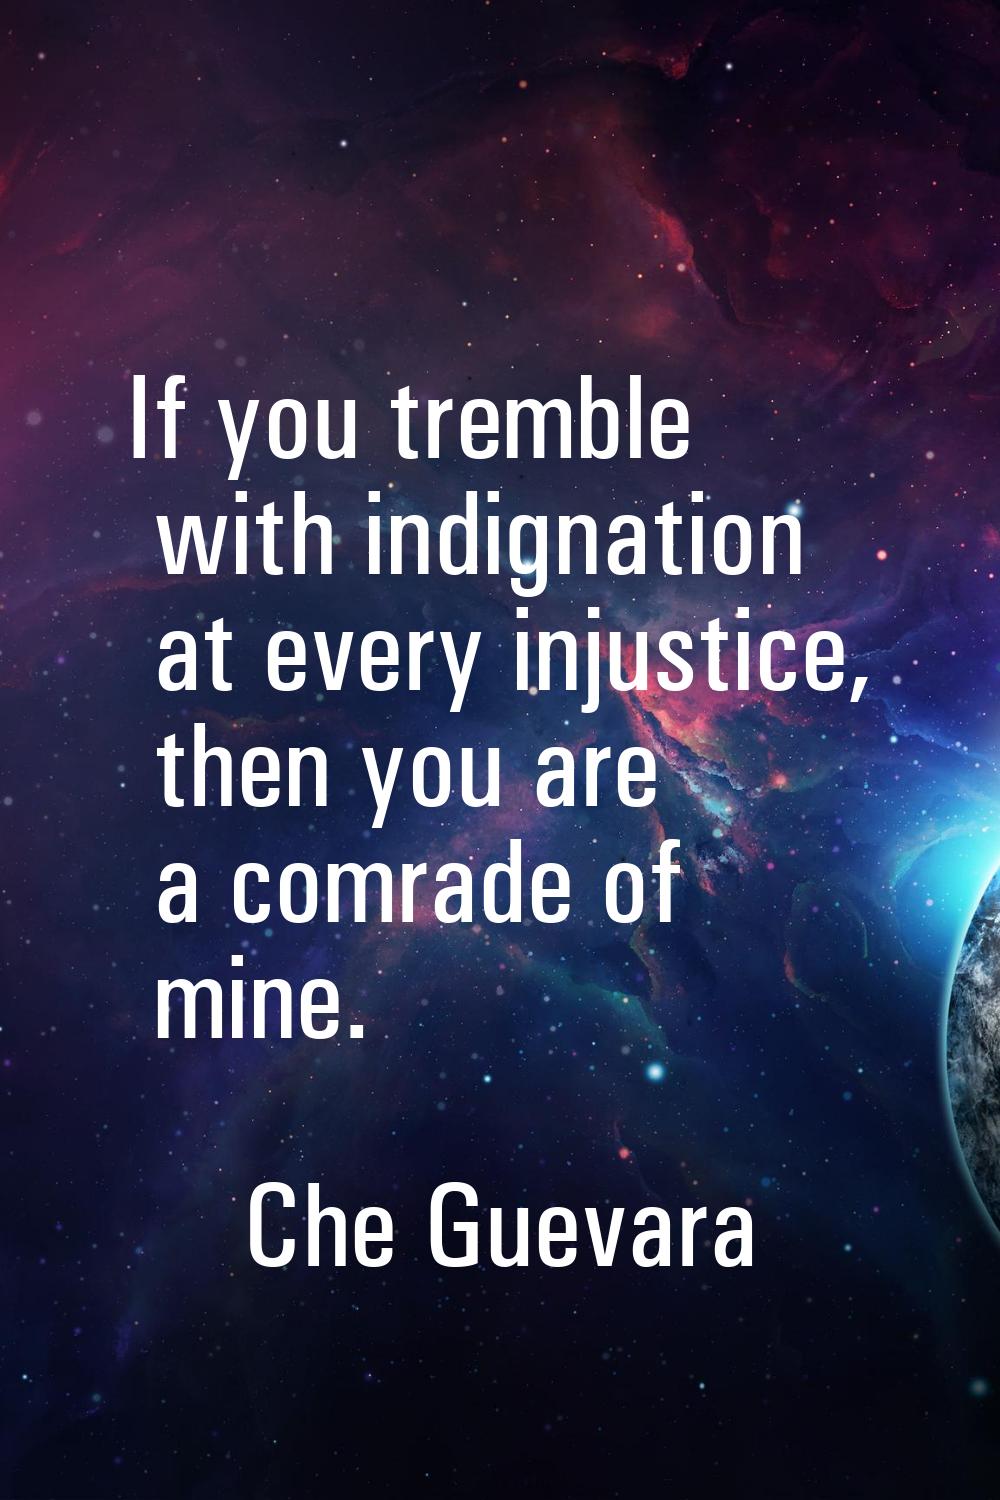 If you tremble with indignation at every injustice, then you are a comrade of mine.